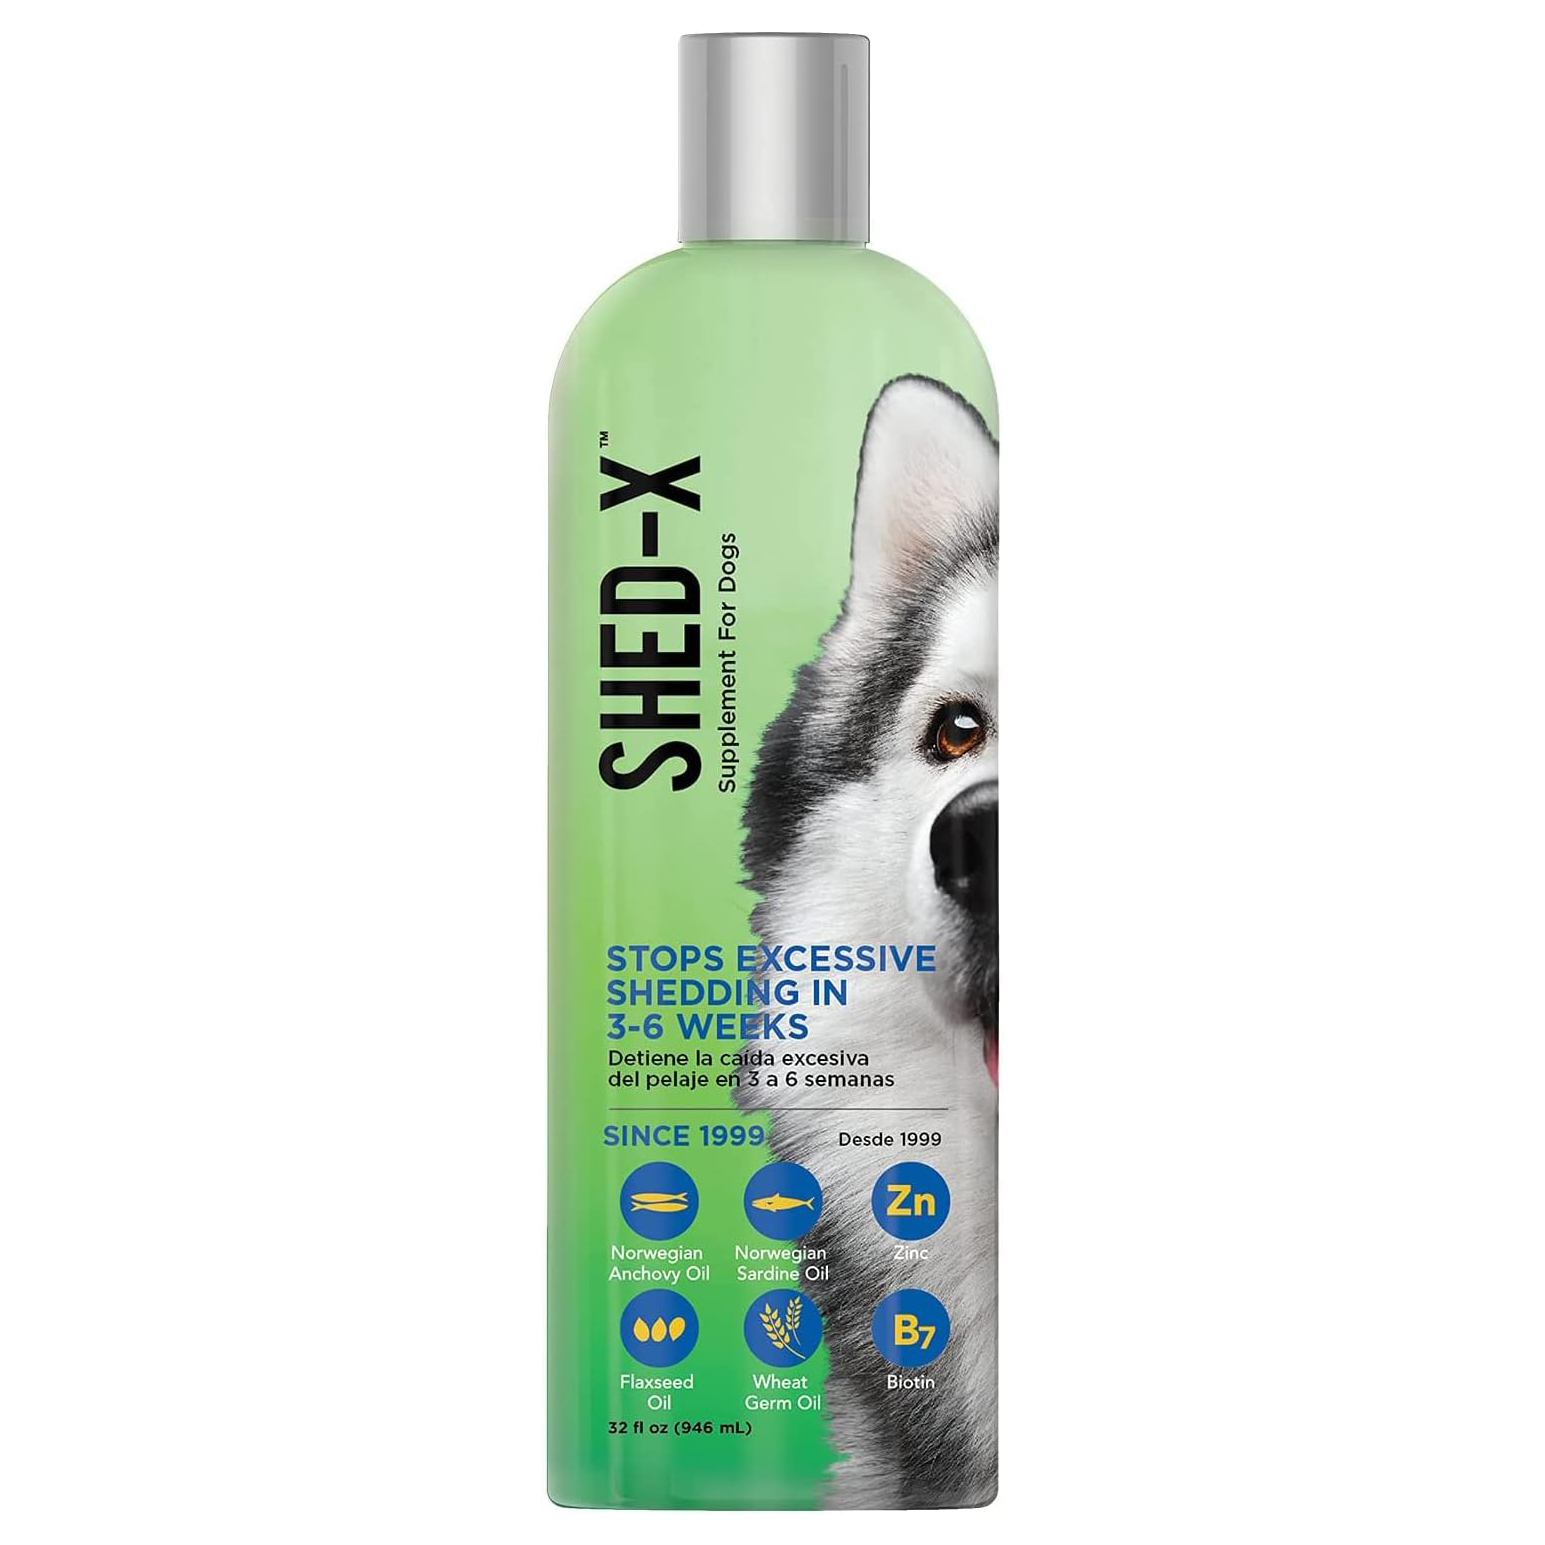 Shed-X Dermaplex Shed Control Nutritional Supplement for Dogs